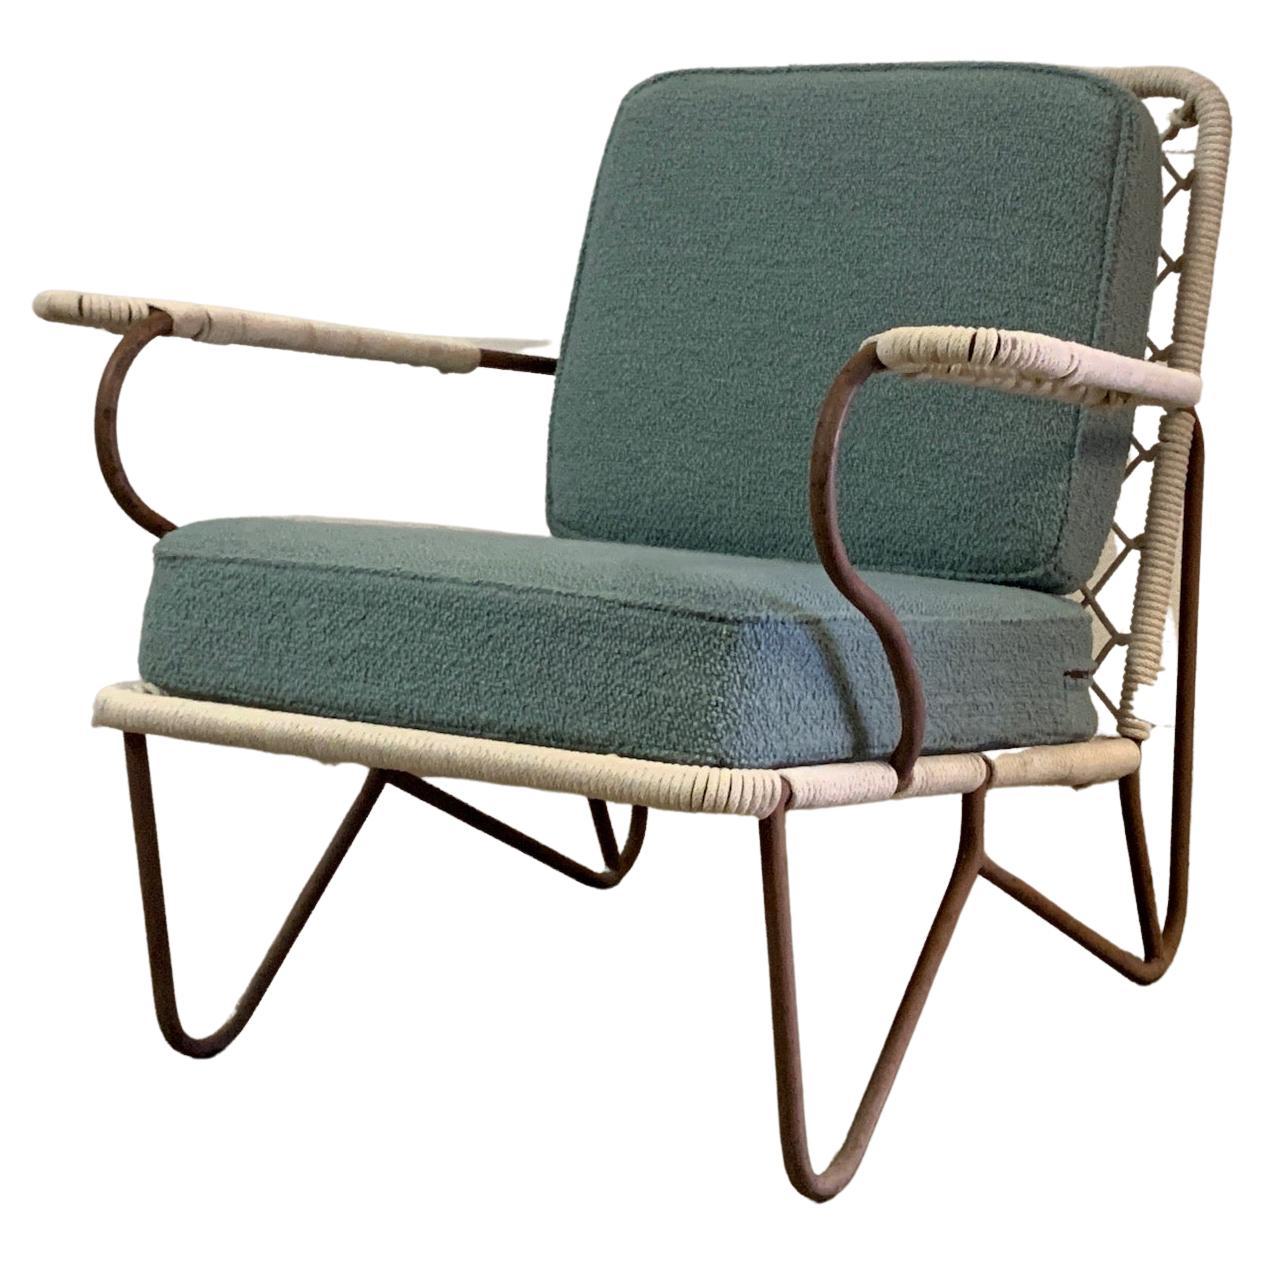 A rope and iron lounge chair.